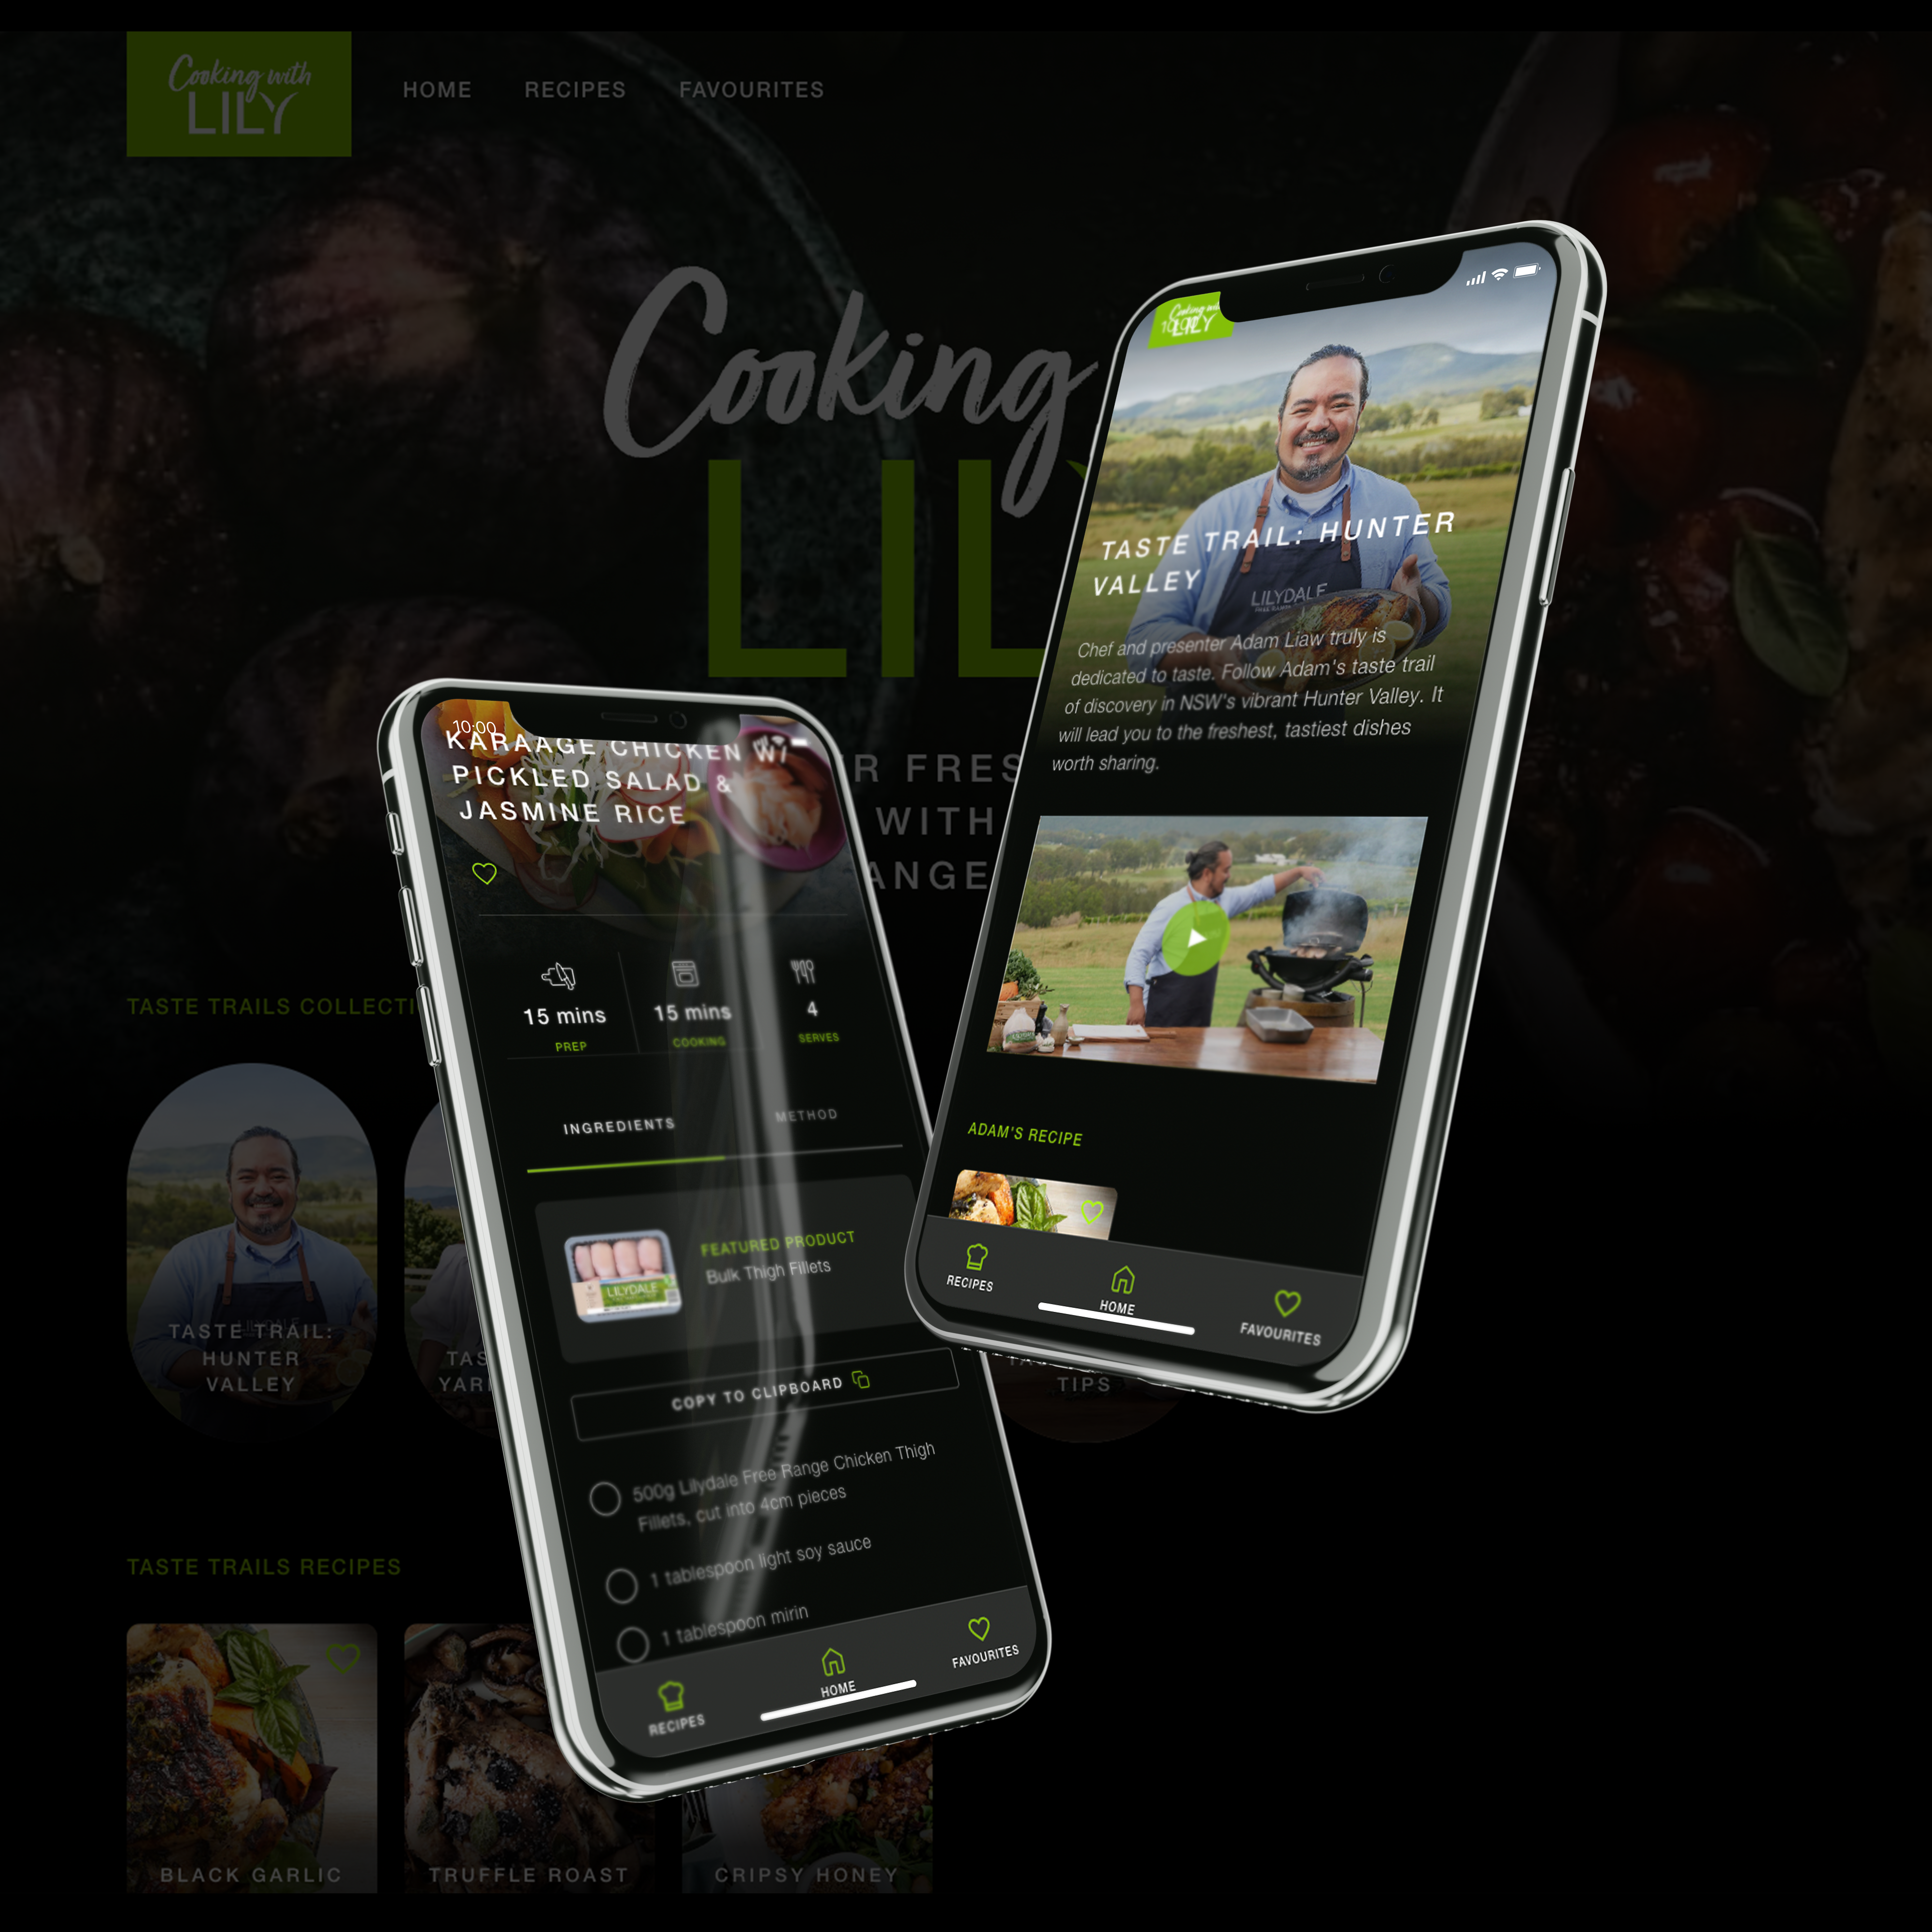 Image showing Cooking with Lily's website on mobile screens